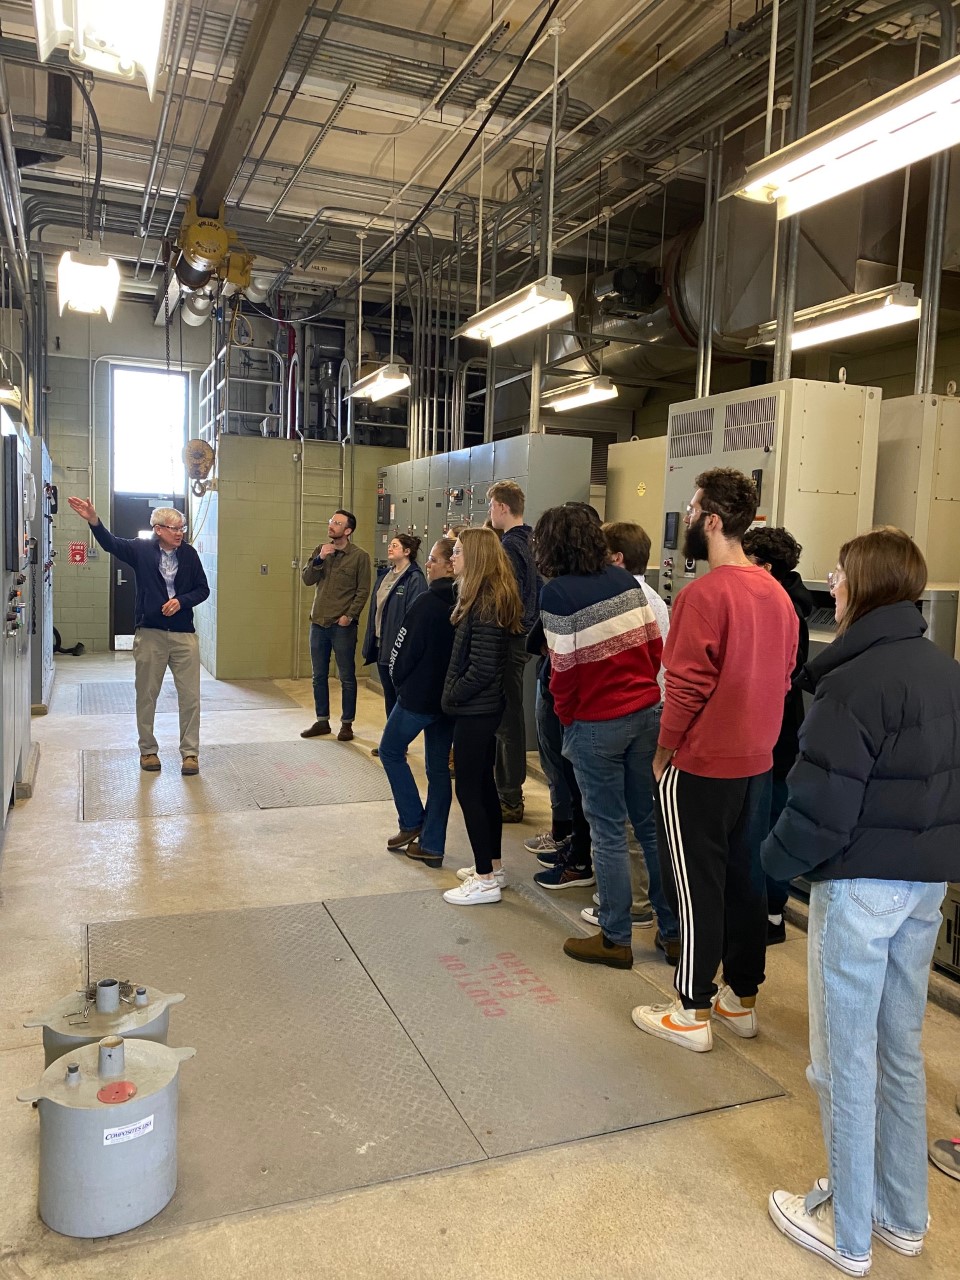 This is a photo of an Endicott College class on a tour of the Influent Building at South Essex Sewerage District. District Engineer, Mike Wilson, leads the discussion as students and professor look around the large, blinking control panels in front of them.